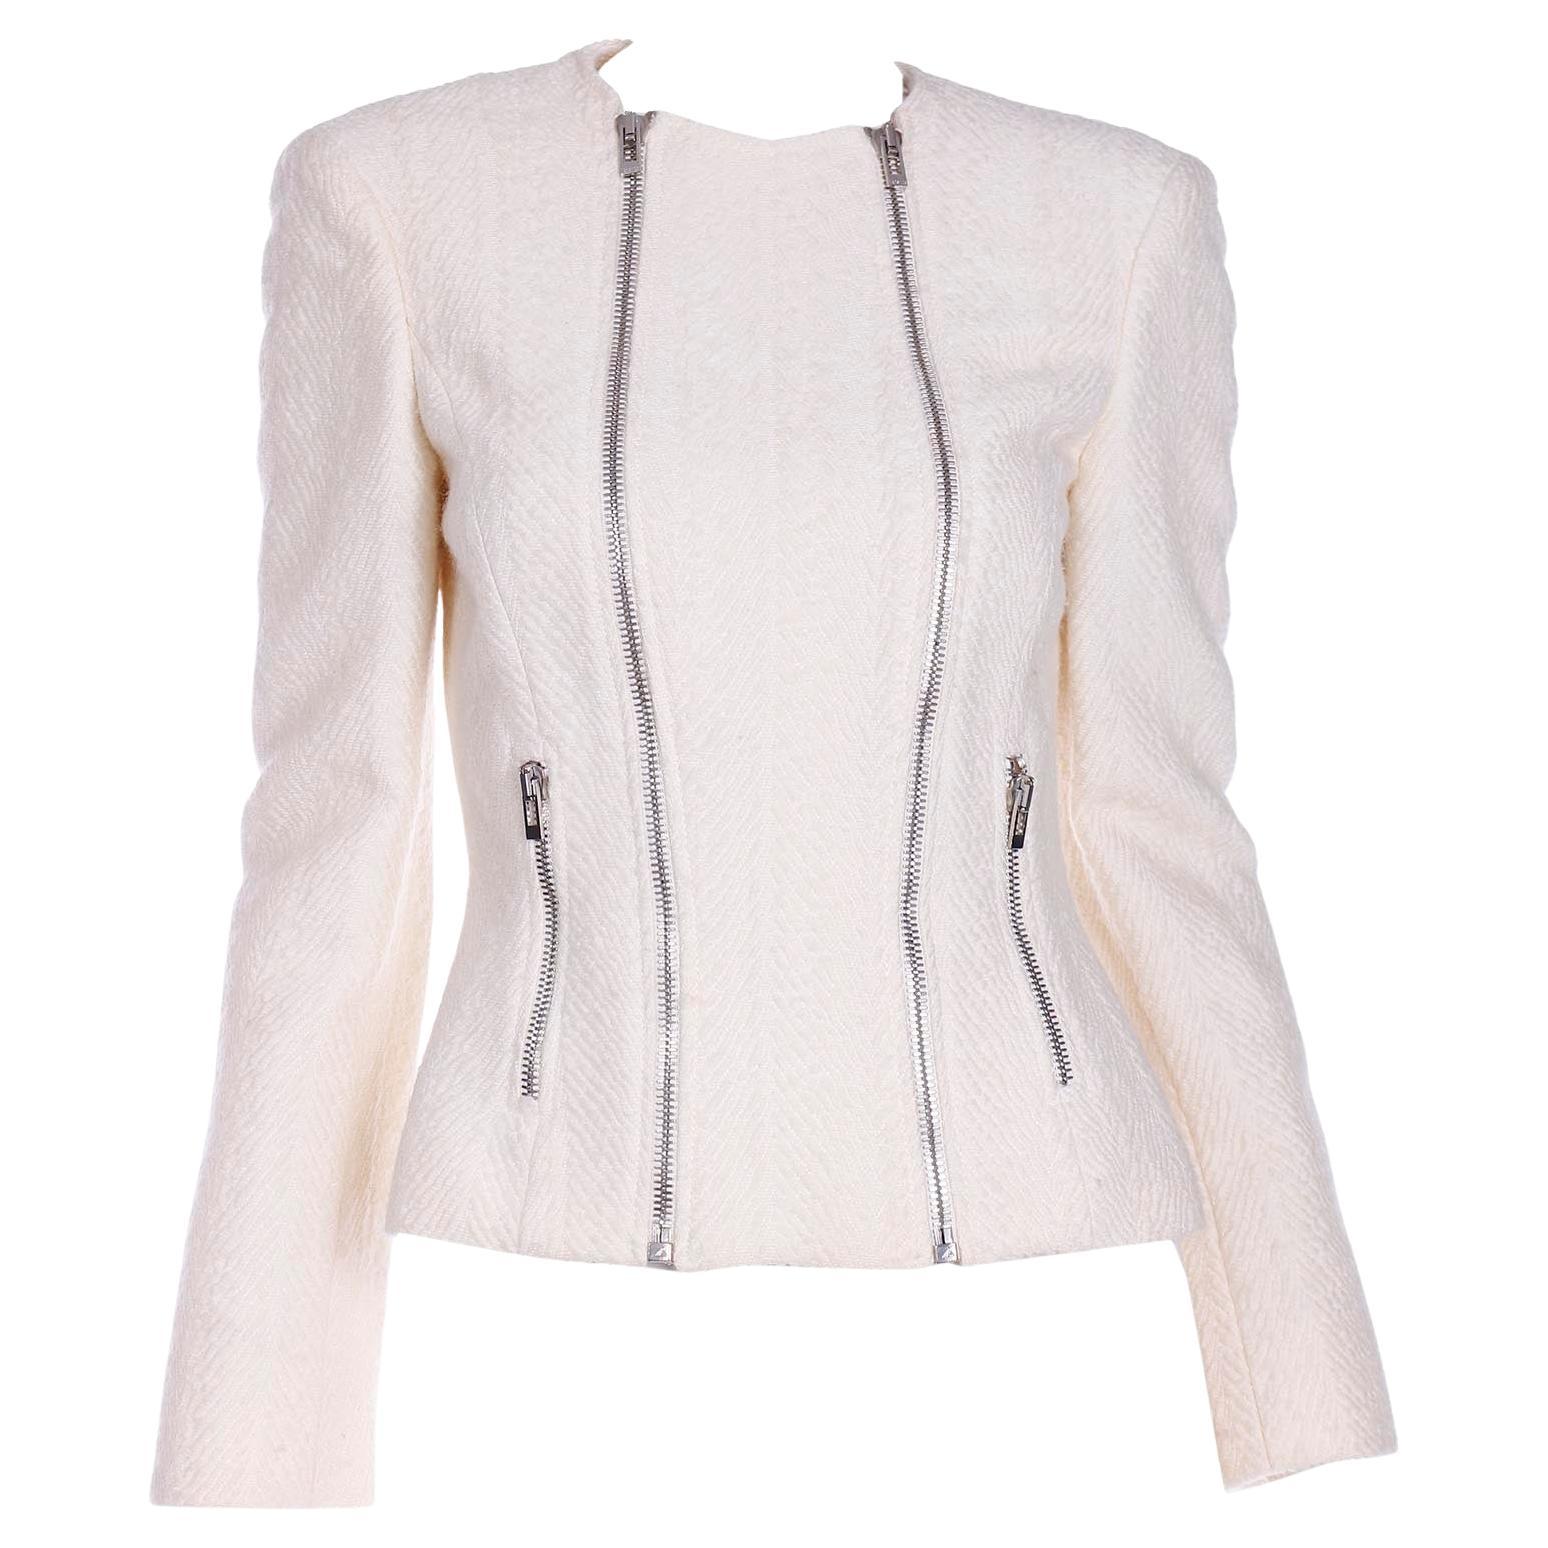 Early 2000s Gianni Versace Ivory Boucle Wool Double Zip Front Jacket For Sale